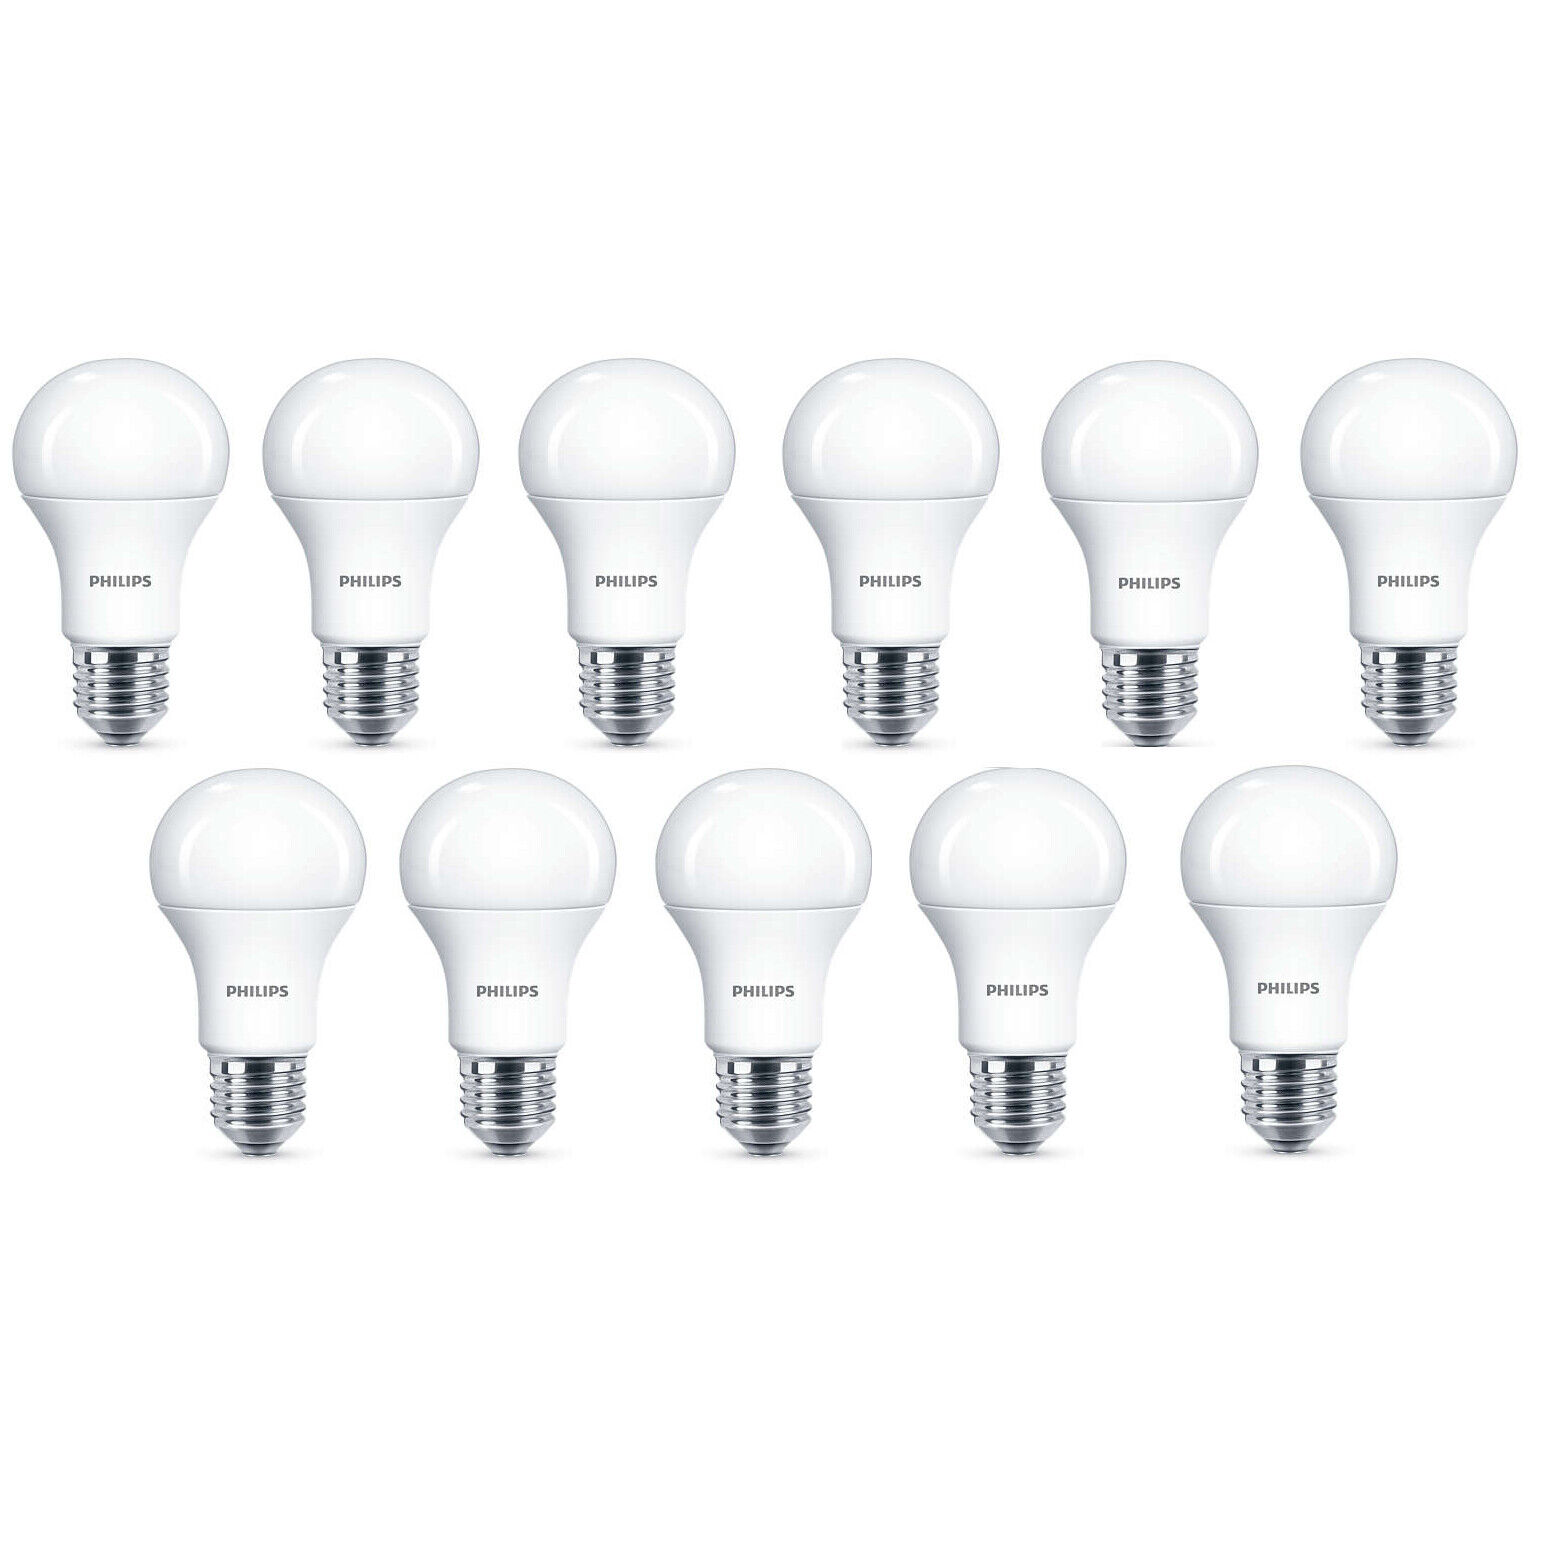 11x Philips LED Frosted E27 75w Warm White Edison Screw Light Bulbs Lamp 1055Lm